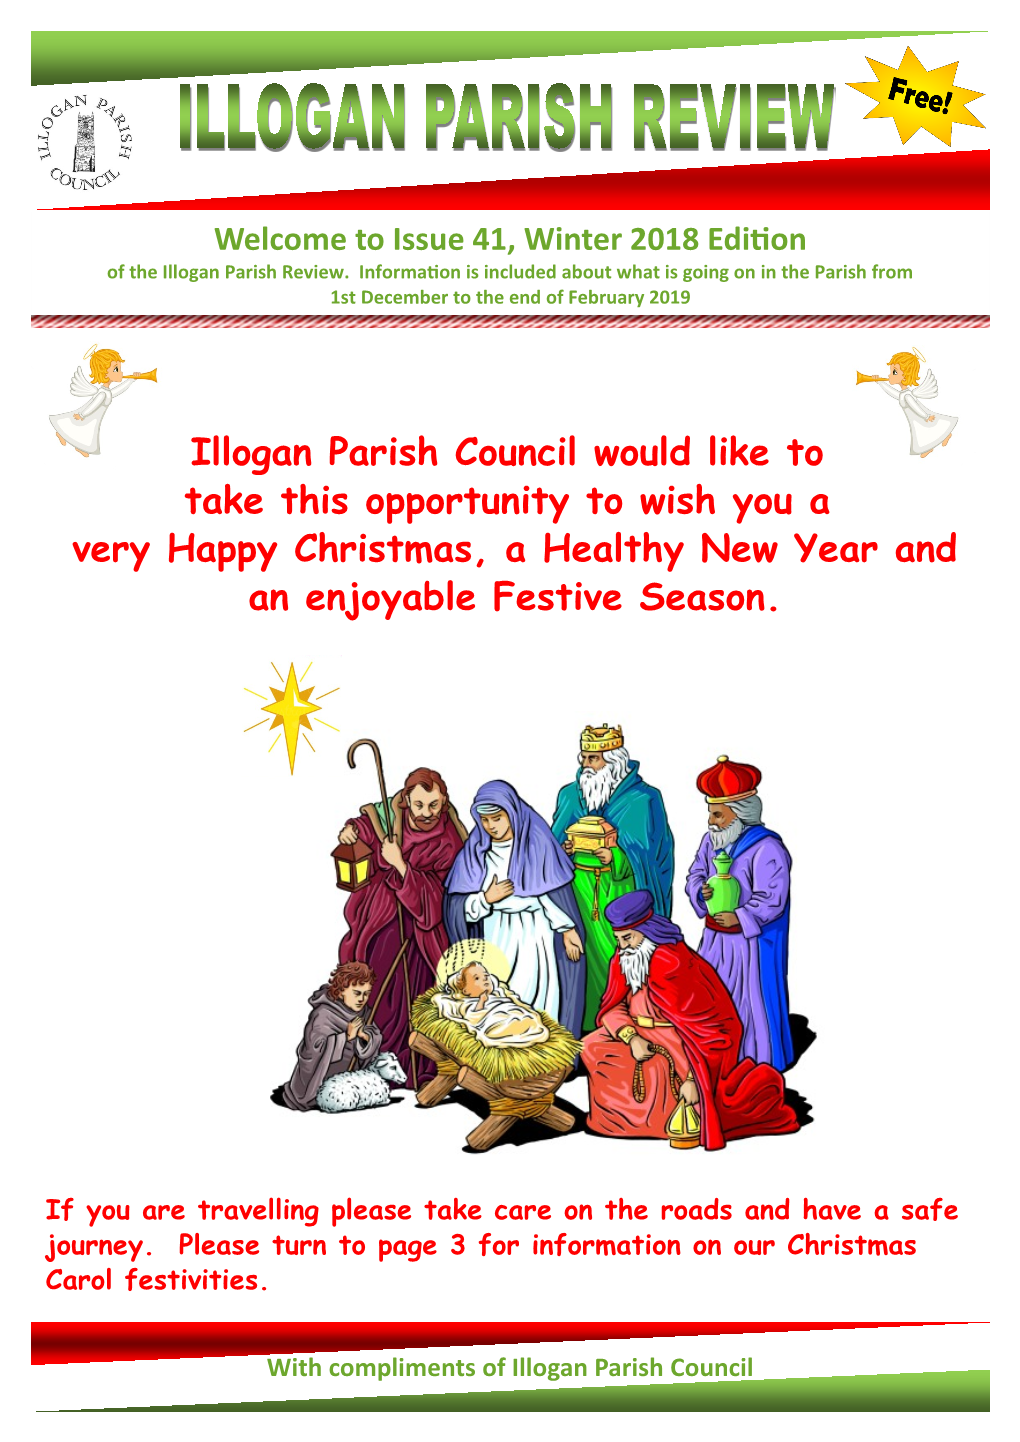 Illogan Parish Council Would Like to Take This Opportunity to Wish You a Very Happy Christmas, a Healthy New Year and an Enjoyable Festive Season